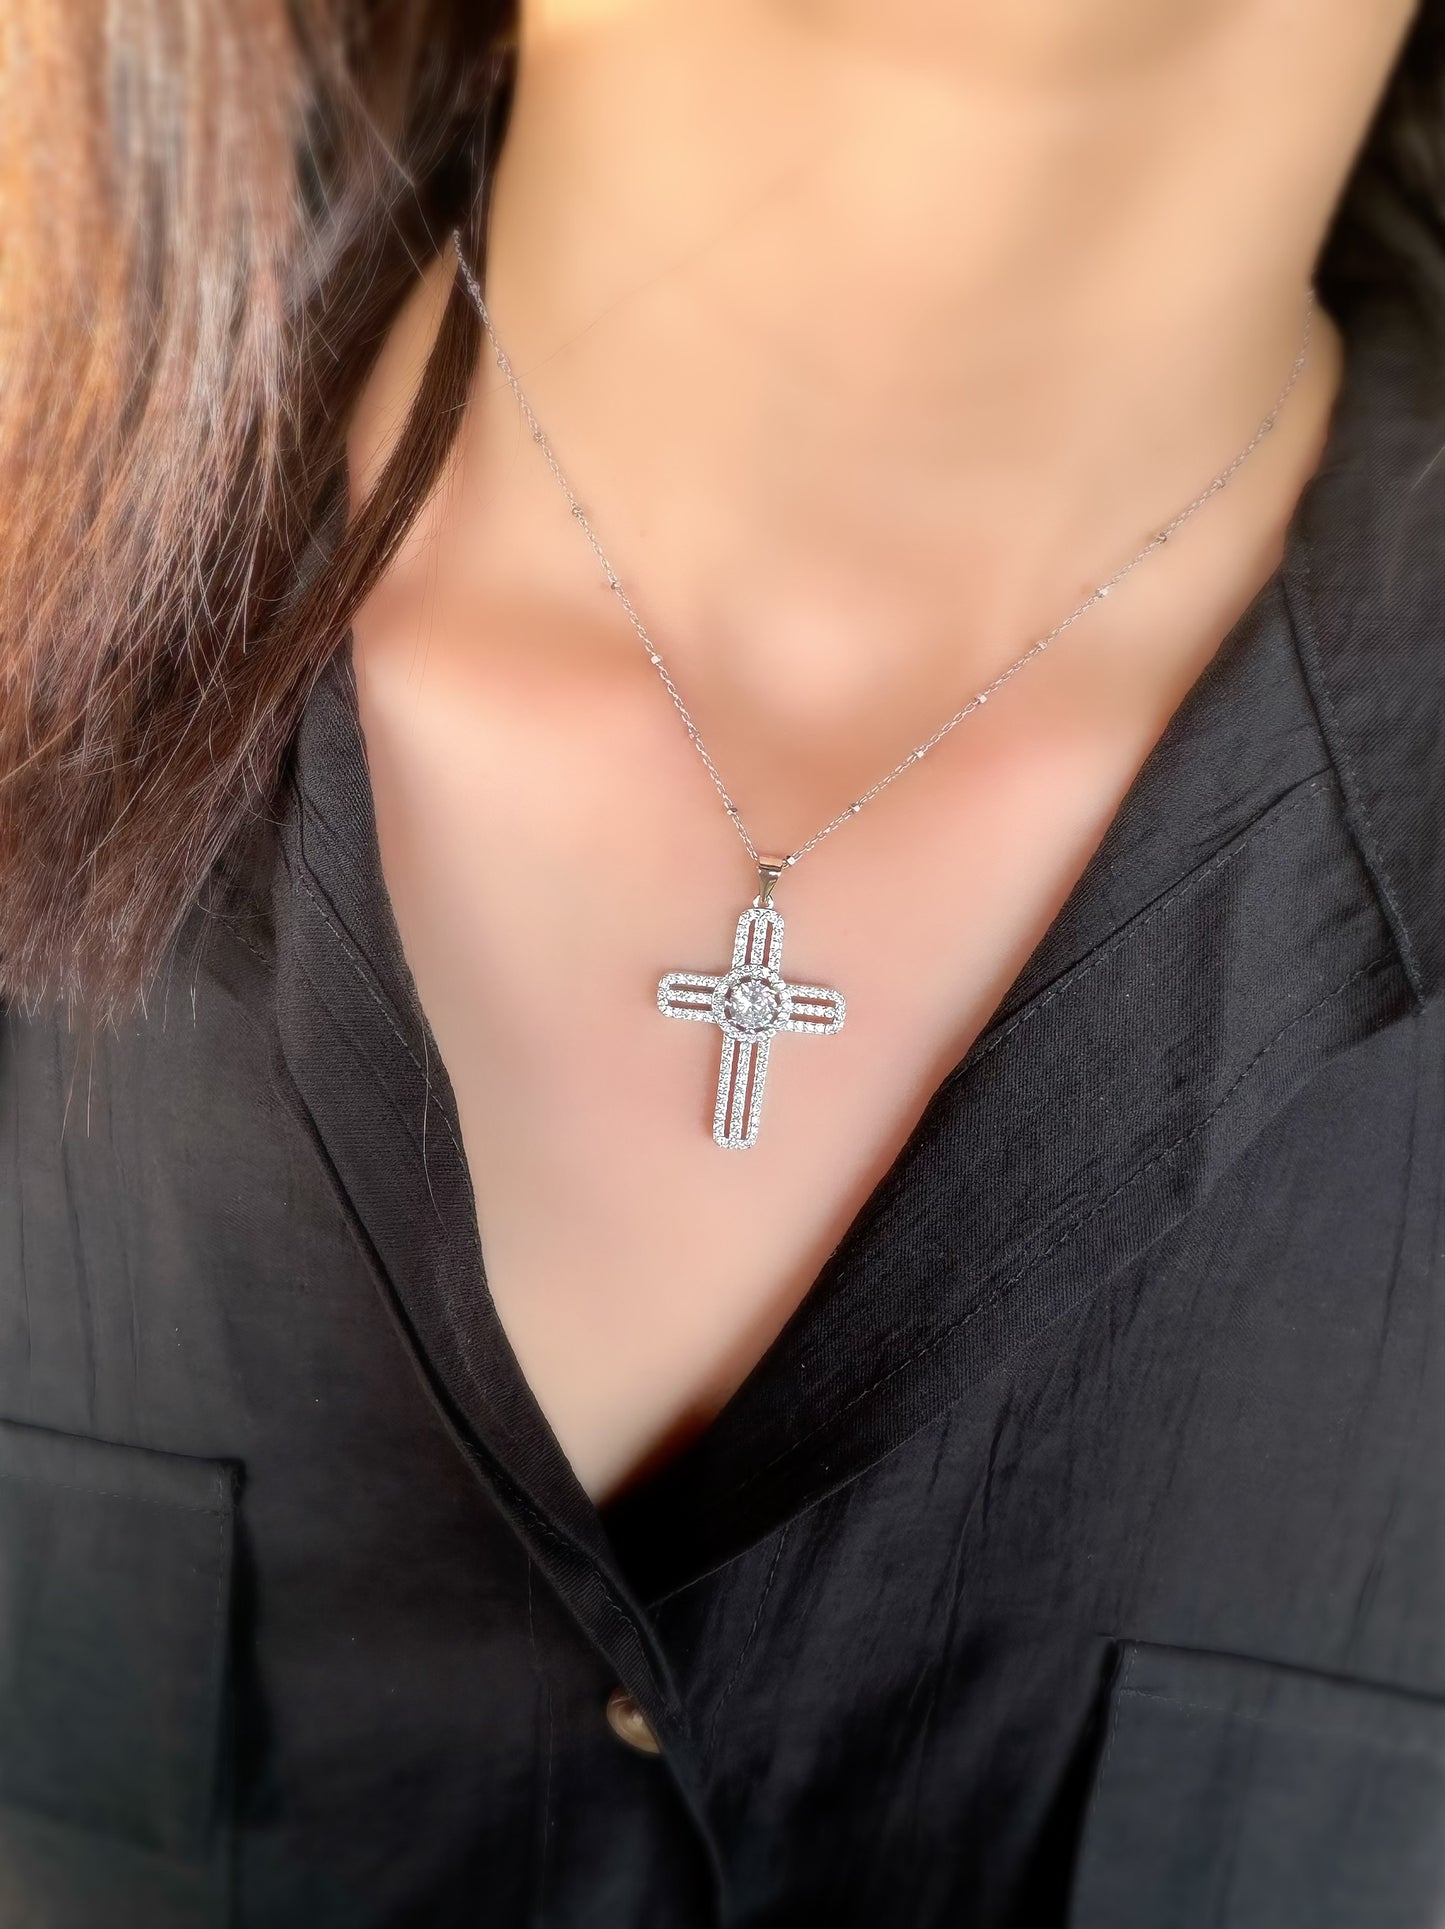 Big Cross Necklace With Round Zircon Stone In The Middle